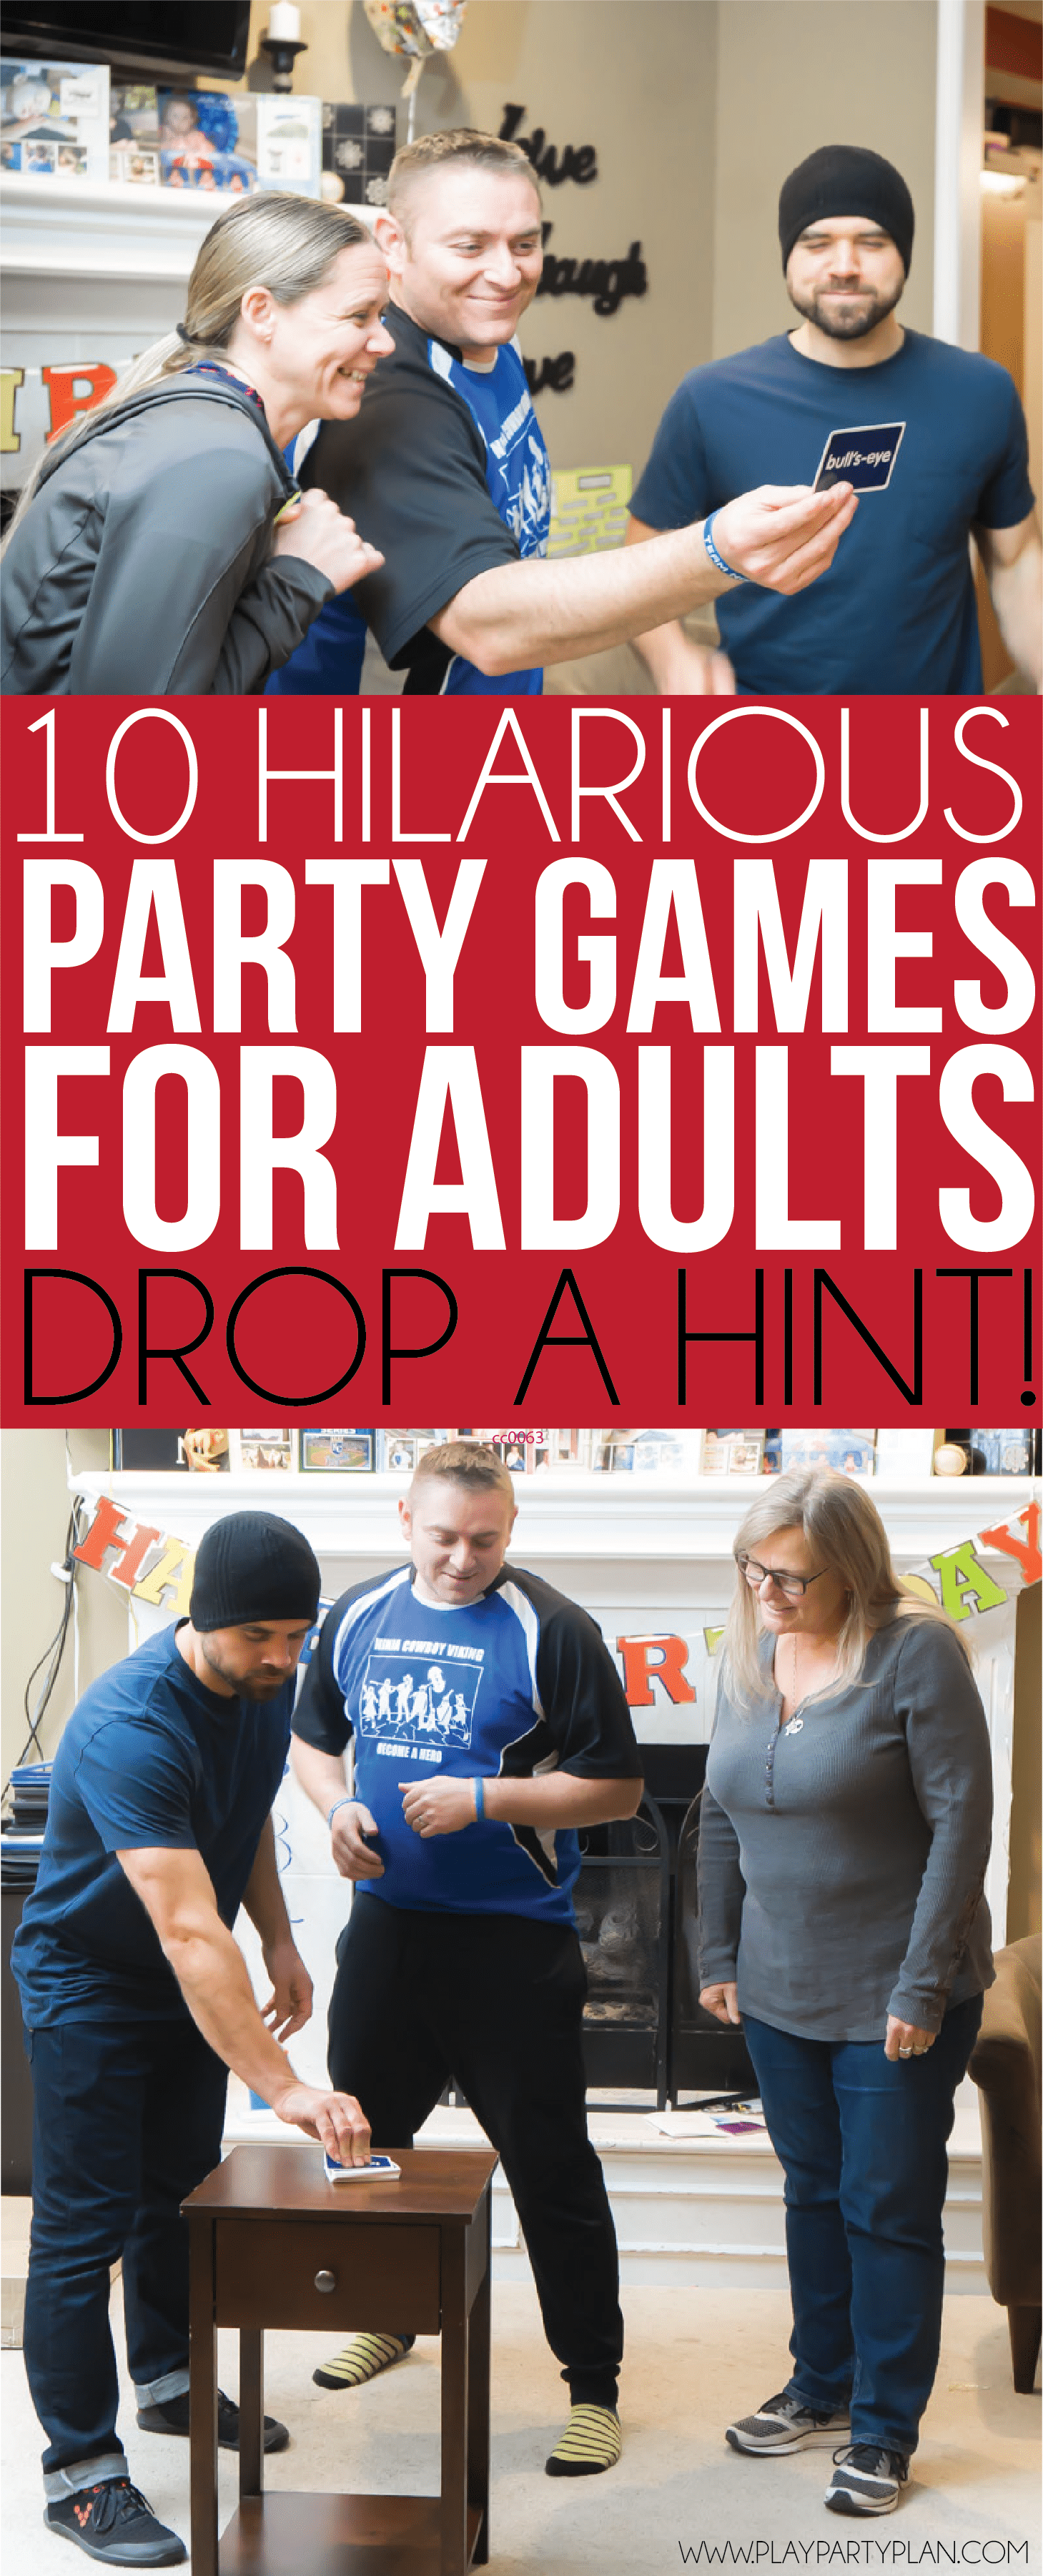 adults free games for mature party